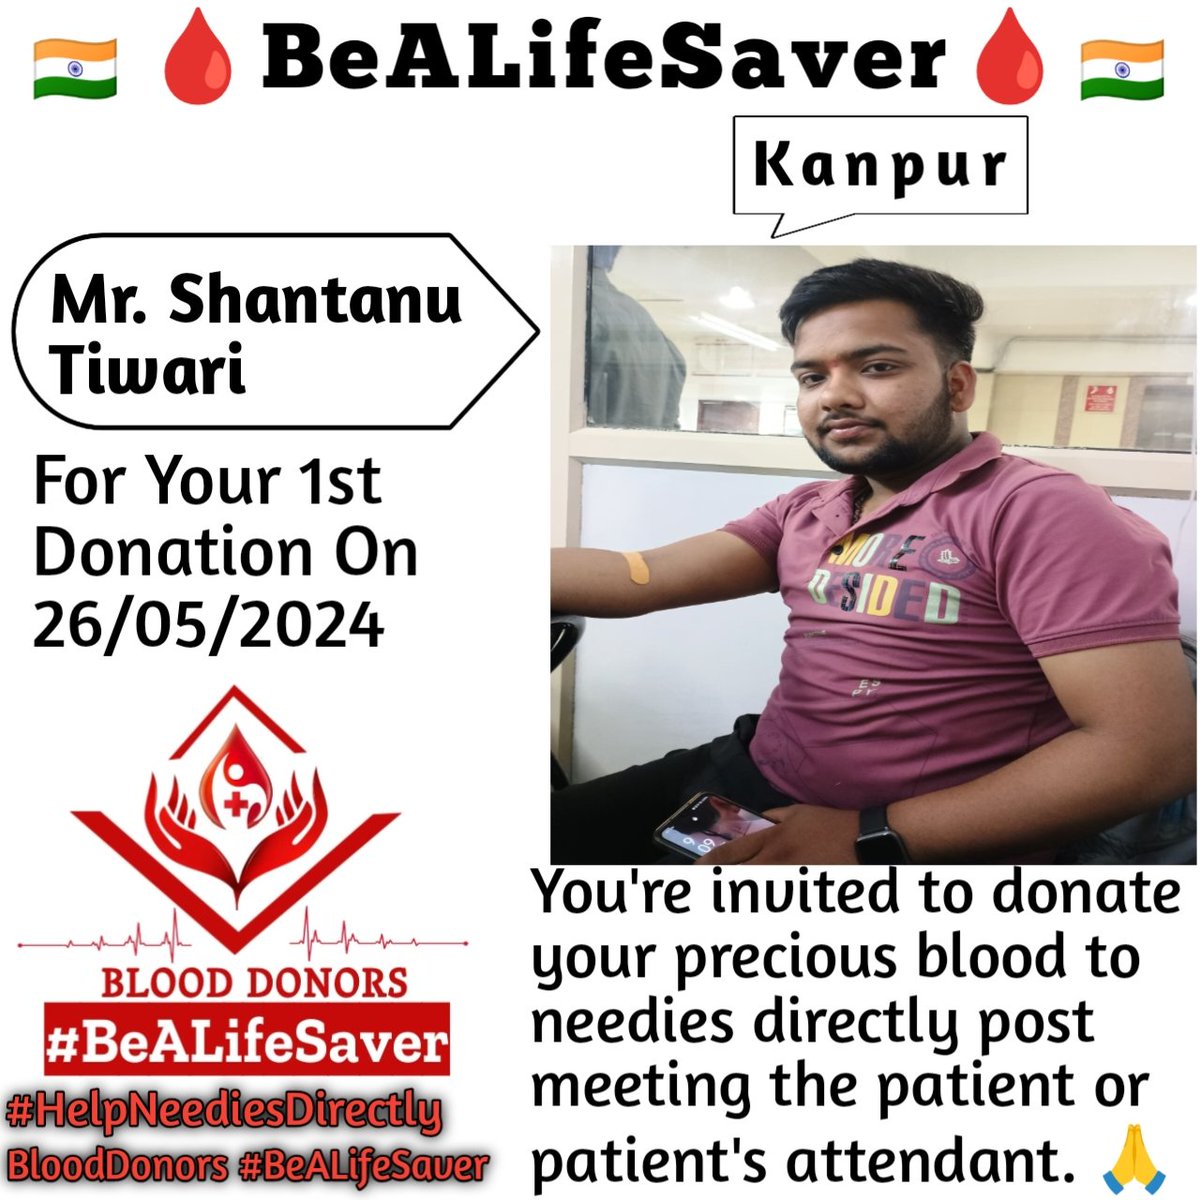 🙏 Congratulations Debutant 🙏 Today's hero, Mr. Shantanu Tiwari Ji, donated blood in Kanpur for the 1st time to help a patient in need. Heartfelt gratitude and respect for his selfless act. *HUMANITY SHOULD BE OUR RACE, LOVE SHOULD BE OUR RELIGION. DONATE BLOOD, SPREAD HAPPINE